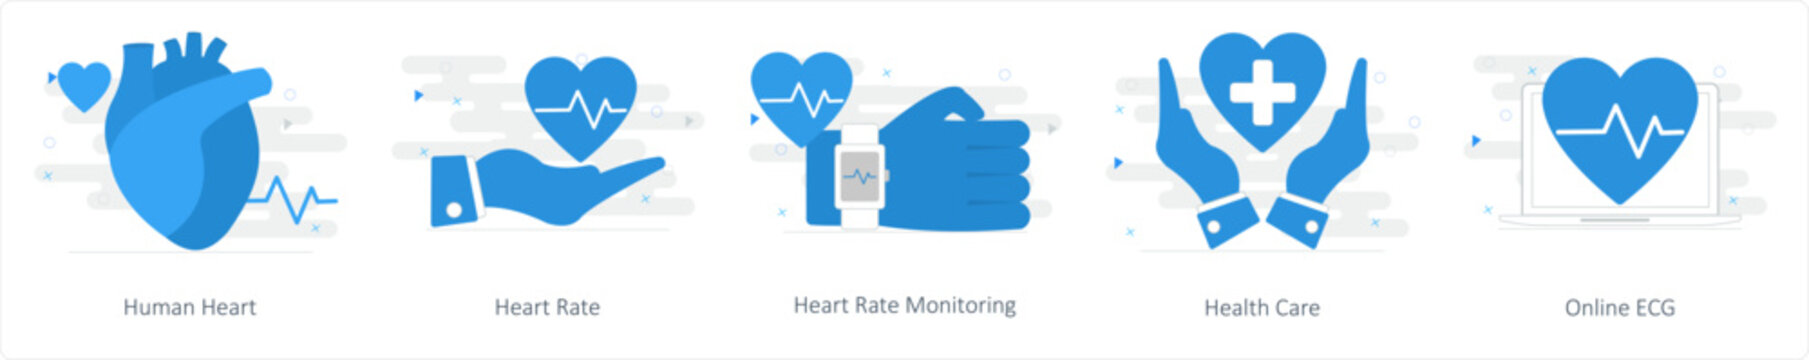 A set of 5 Mix icons as human heart, heart rate, heart rate monitoring